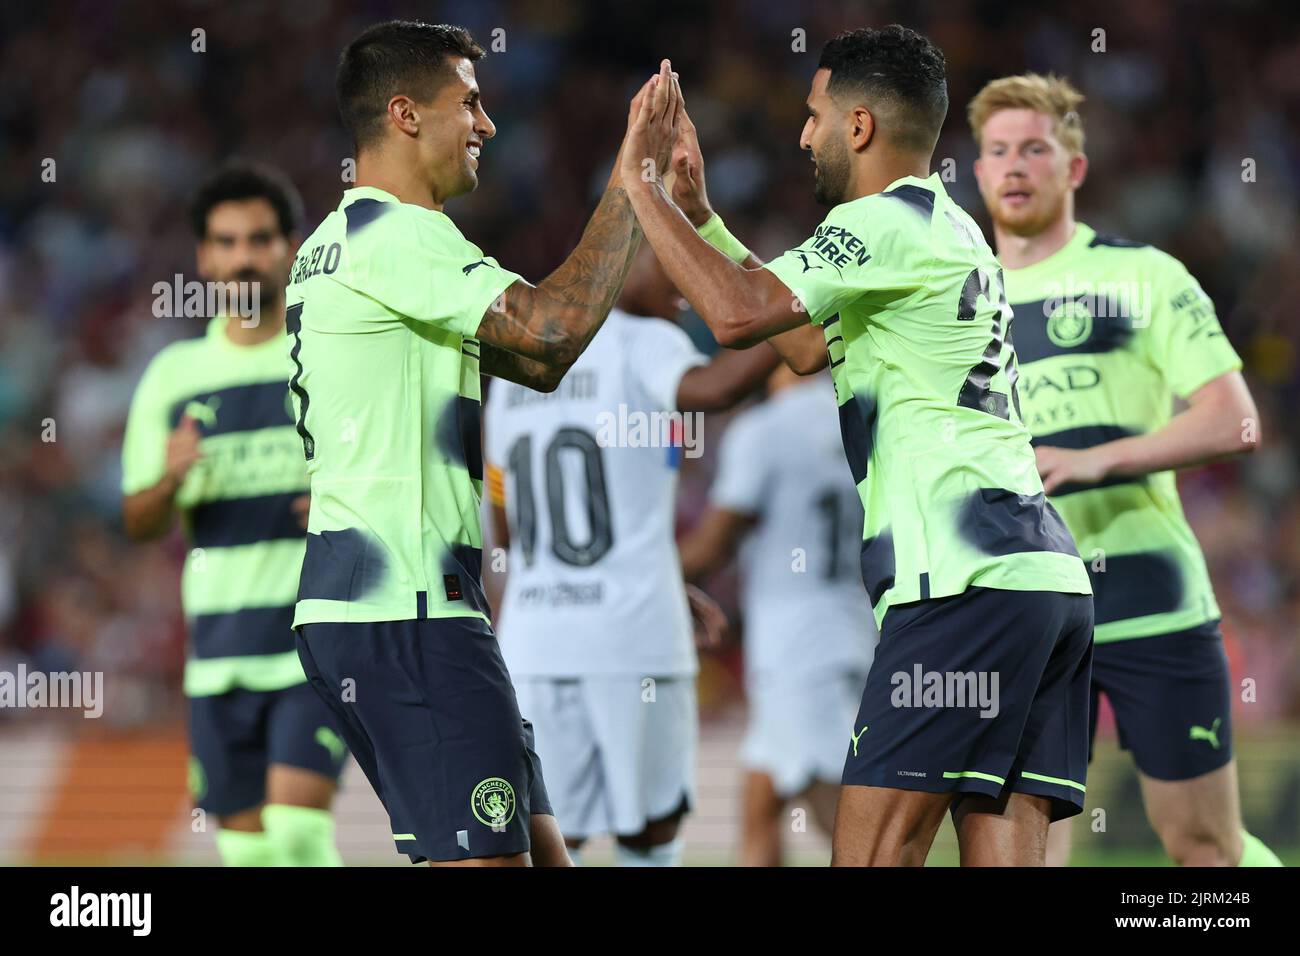 Barcelona, Spain. 24th Aug, 2022. Riyad Mahrez of Manchester City celebrate a goal with Joao Cancelo of Manchester City during the benefic friendly match to raise funds for ELA between FC Barcelona and Manchester City at Spotify Camp Nou in Barcelona, Spain. Credit: DAX Images/Alamy Live News Stock Photo